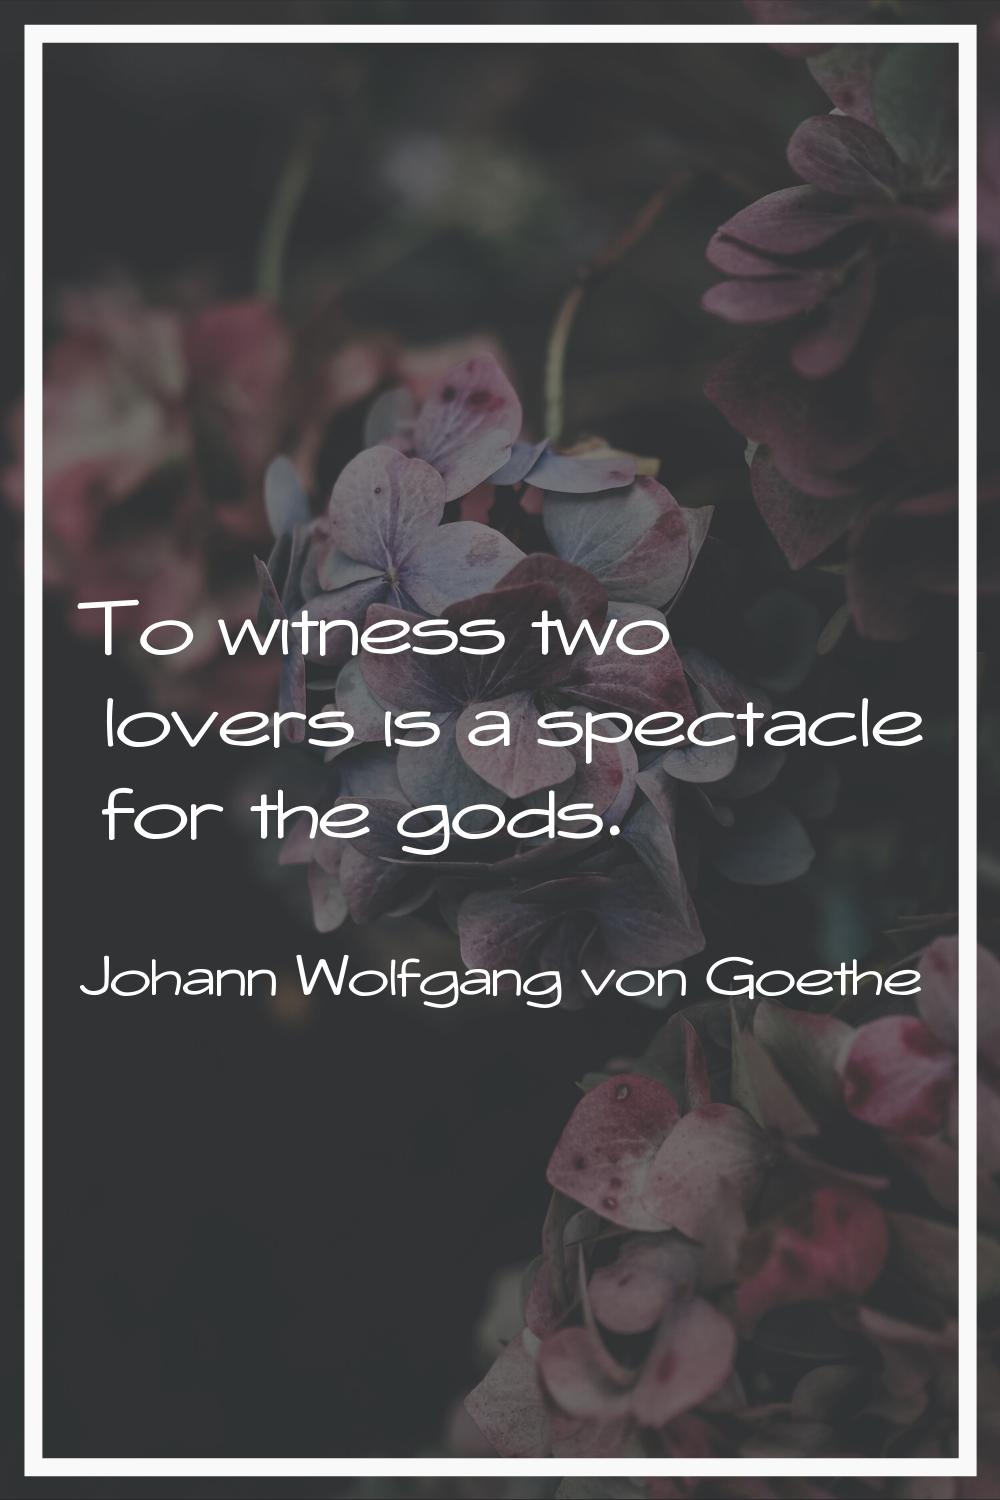 To witness two lovers is a spectacle for the gods.